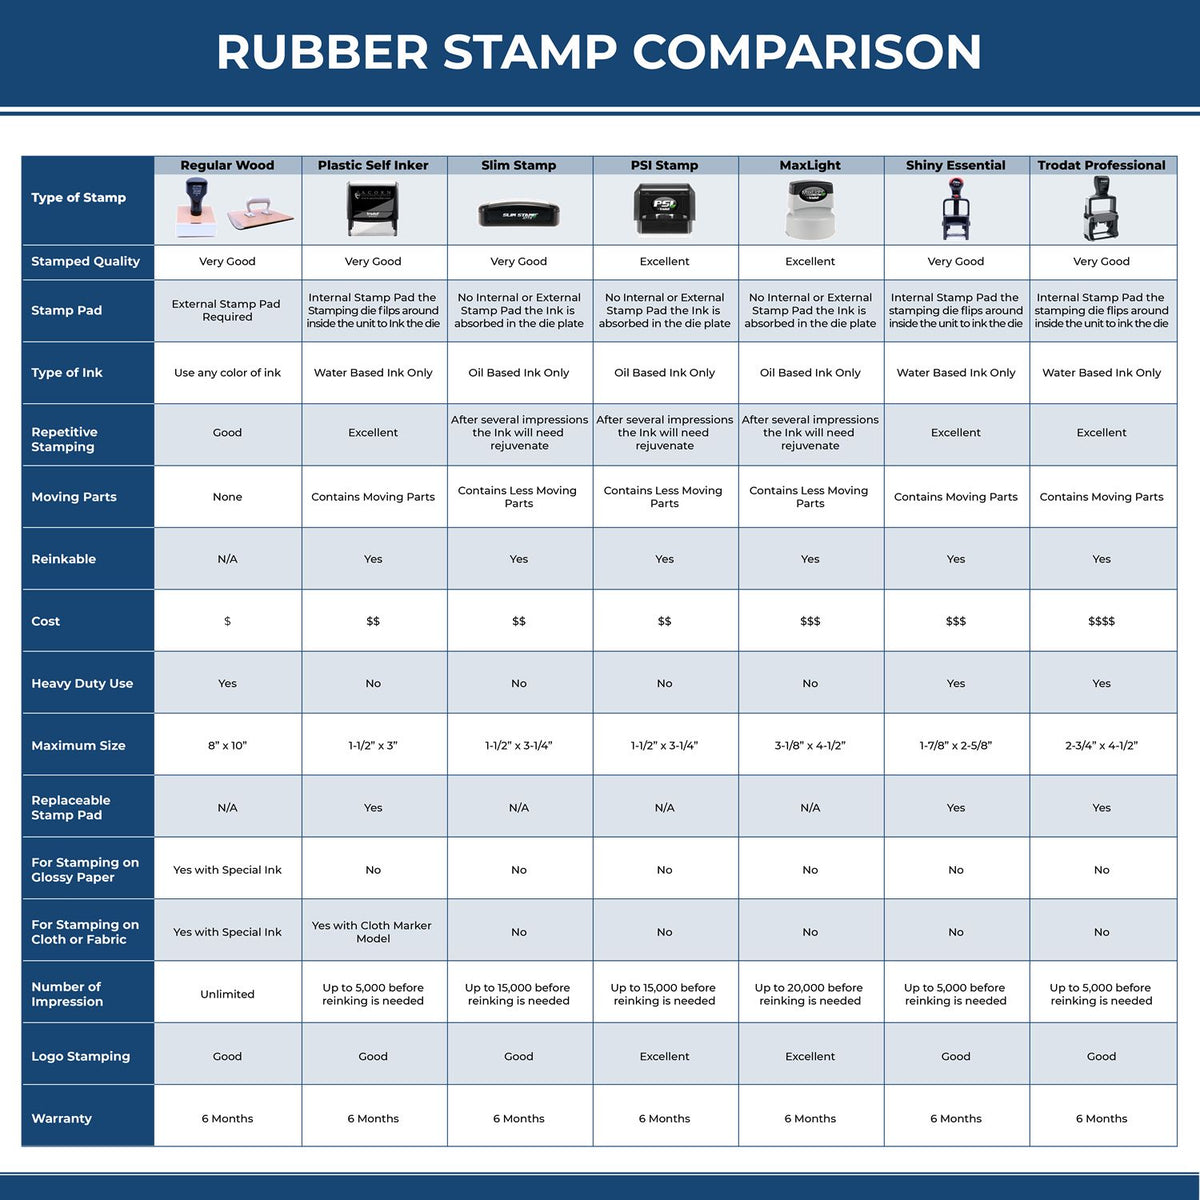 Large Self-Inking Certificada Stamp 5554S Rubber Stamp Comparison